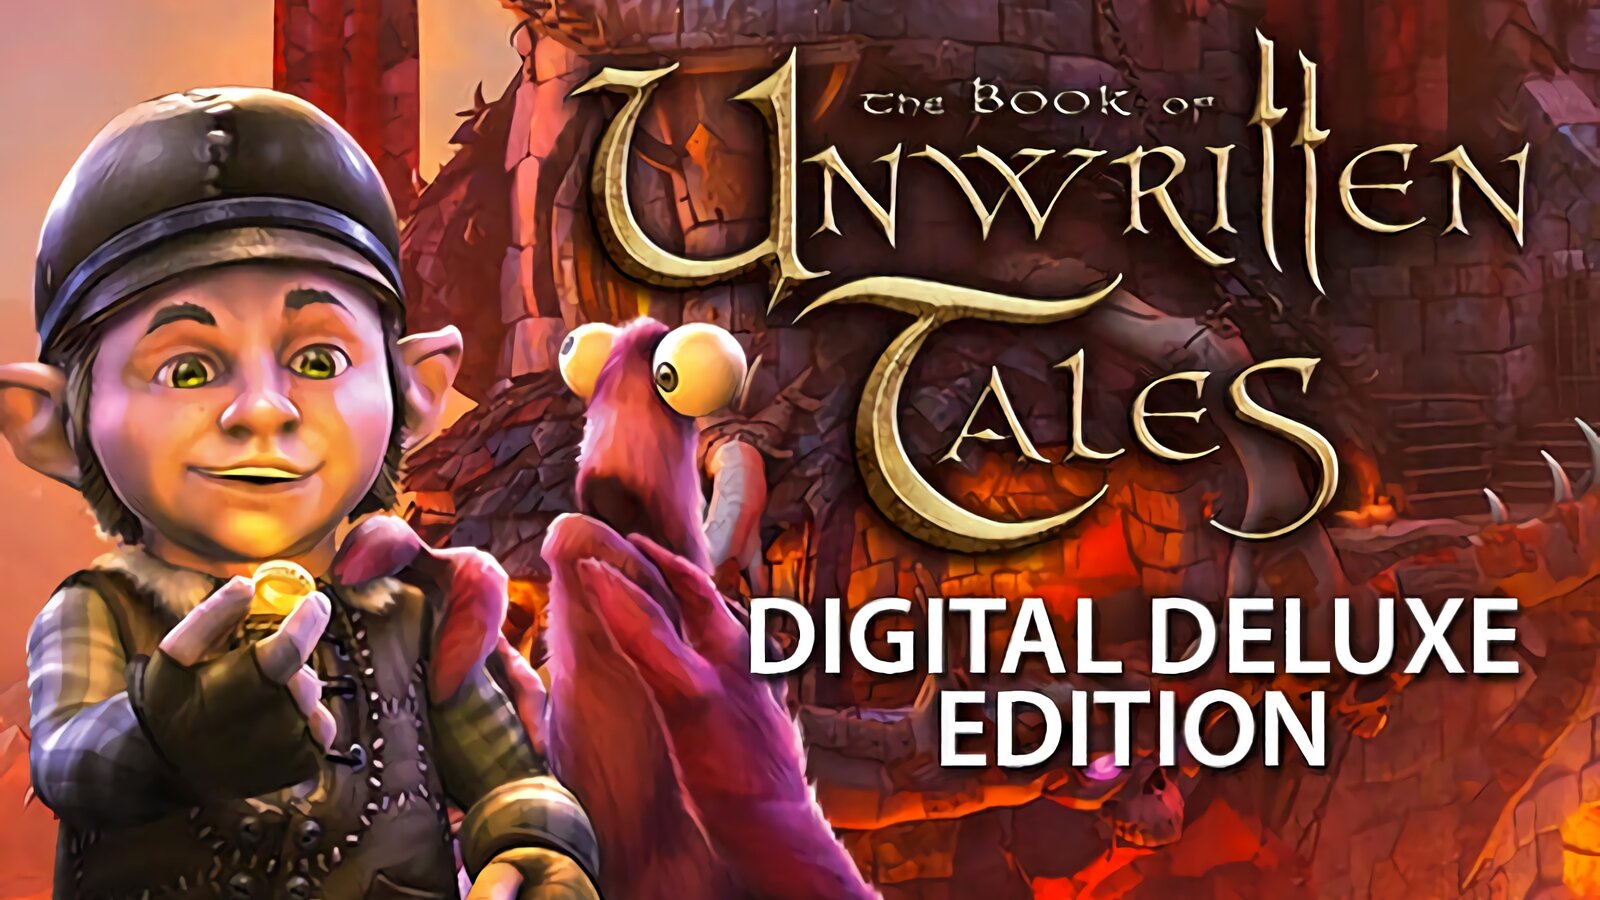 The Book of Unwritten Tales - Deluxe Edition